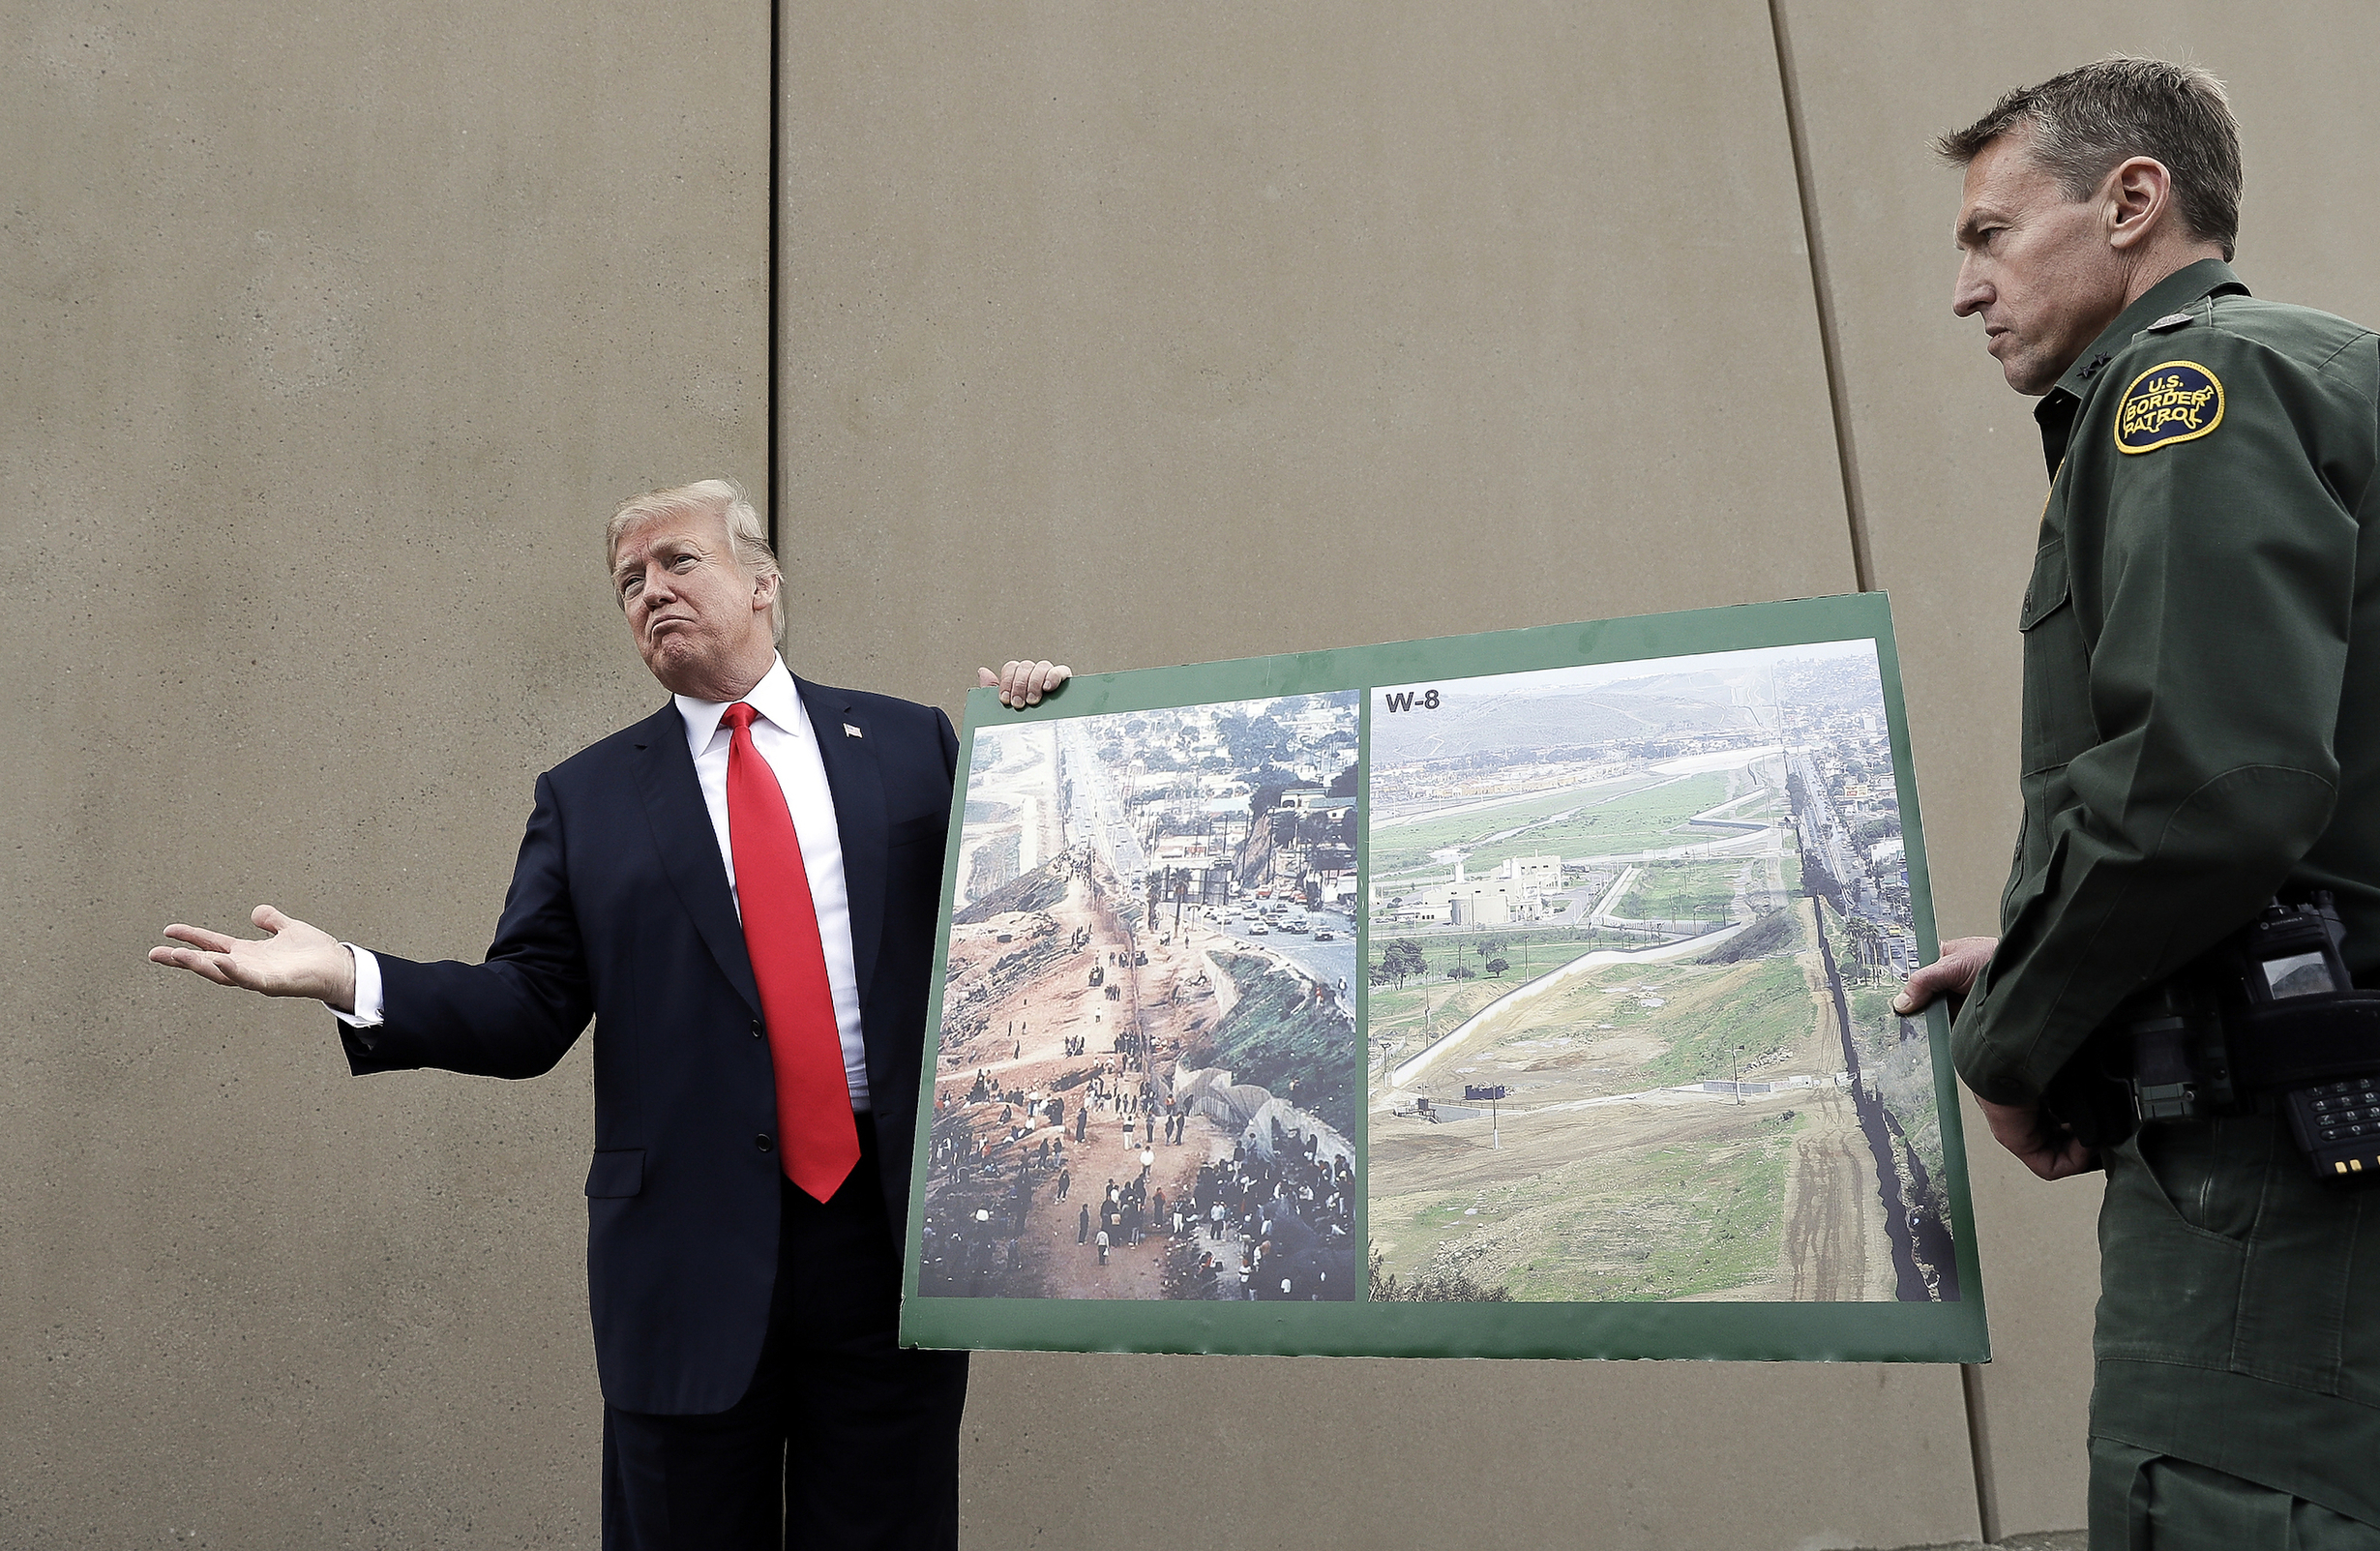 PHOTO: In this March 13, 2018, file photo, President Donald Trump holds a poster with photographs of the U.S.-Mexico border area as he reviews border wall prototypes in San Diego with Rodney Scott, the U.S. Border Patrol's San Diego sector chief.